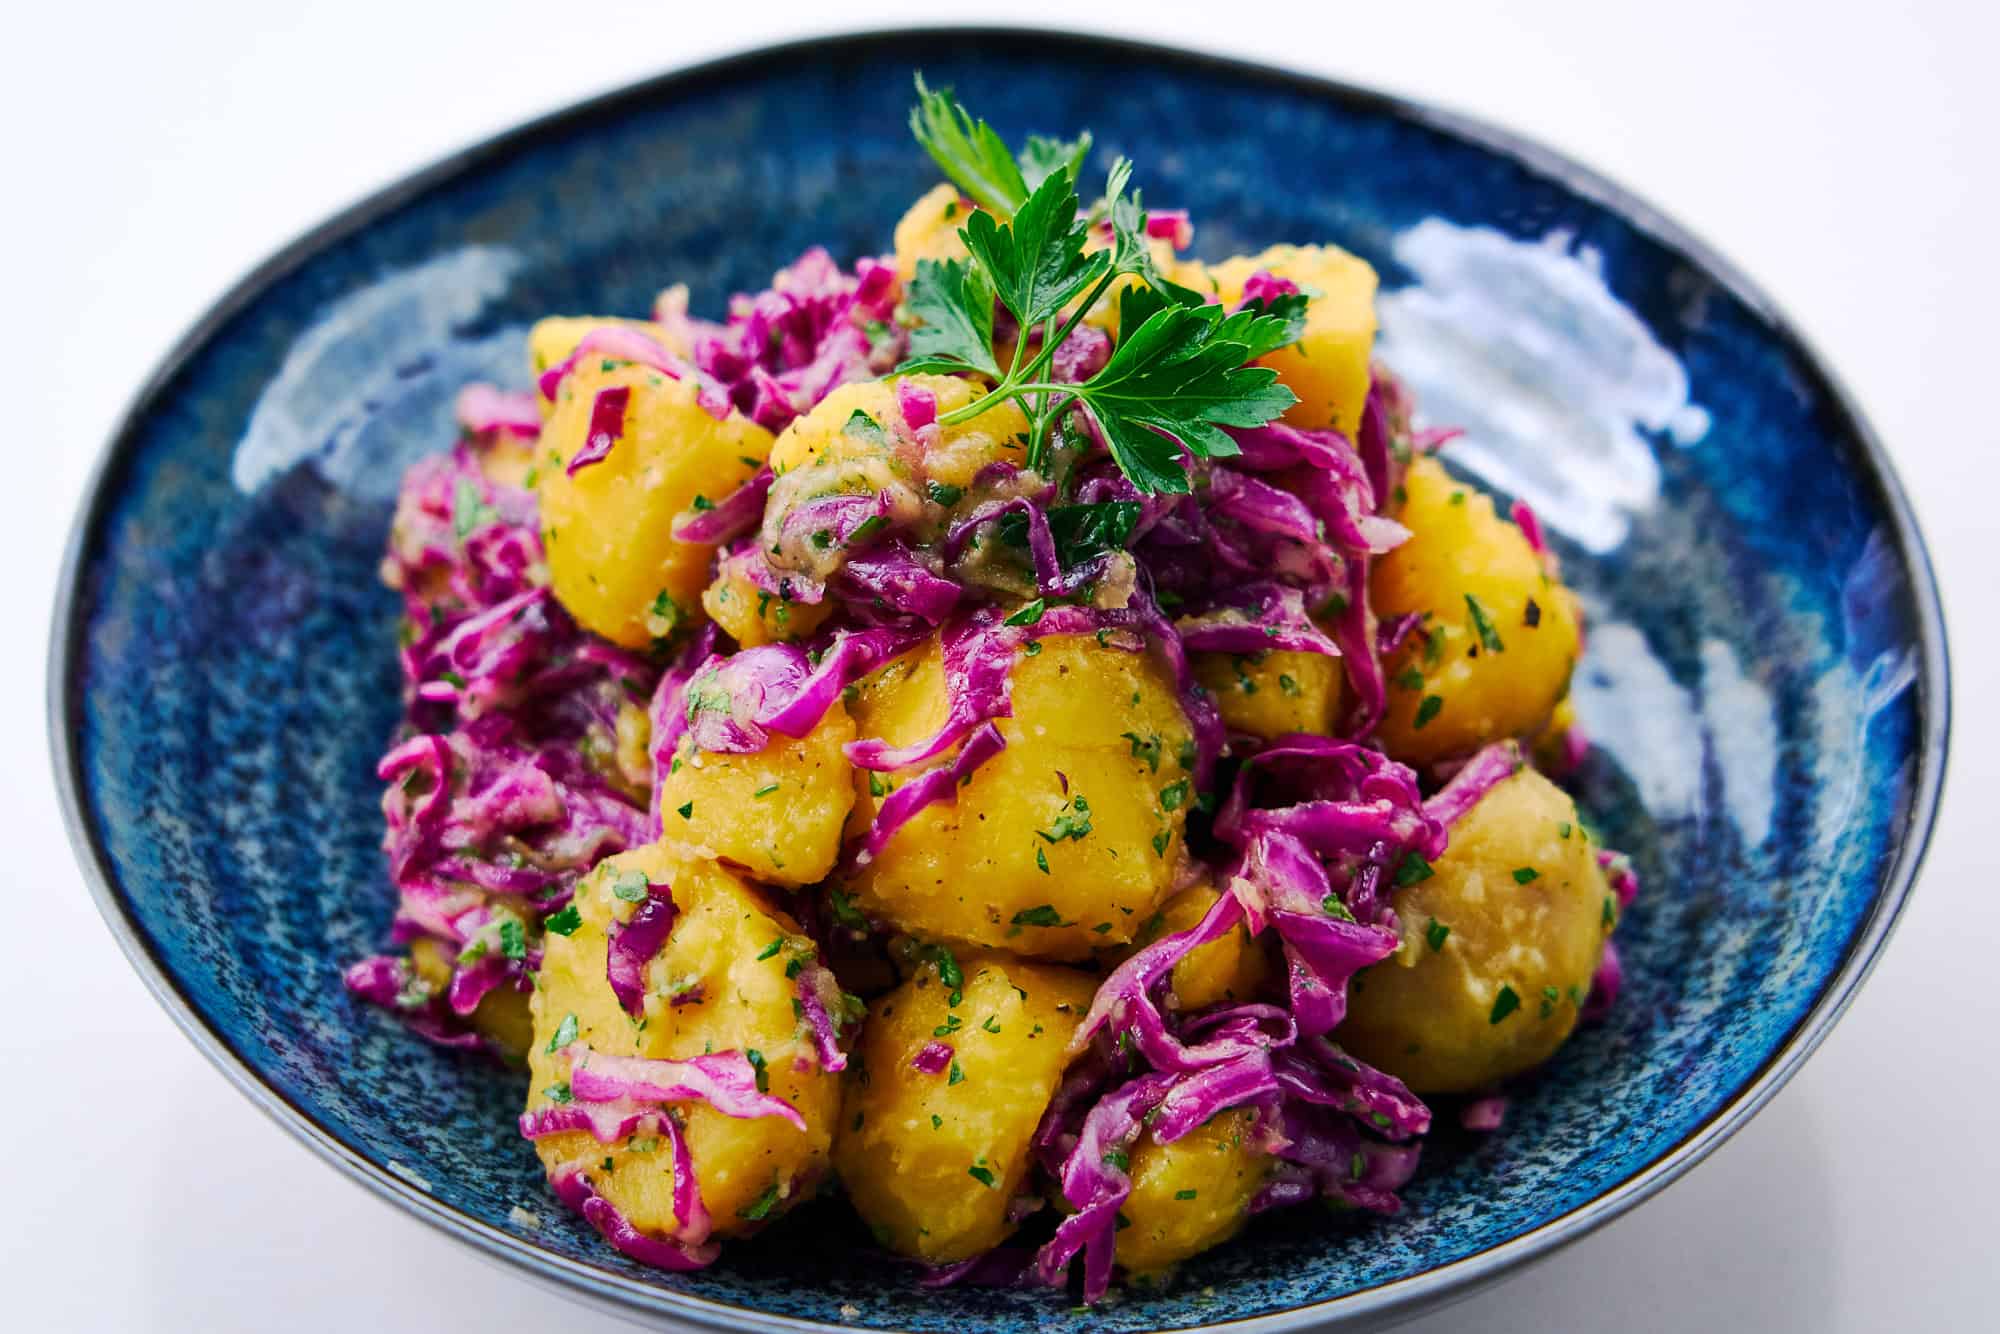 Refreshing potato salad with golden potatoes and quick pickled red cabbage.